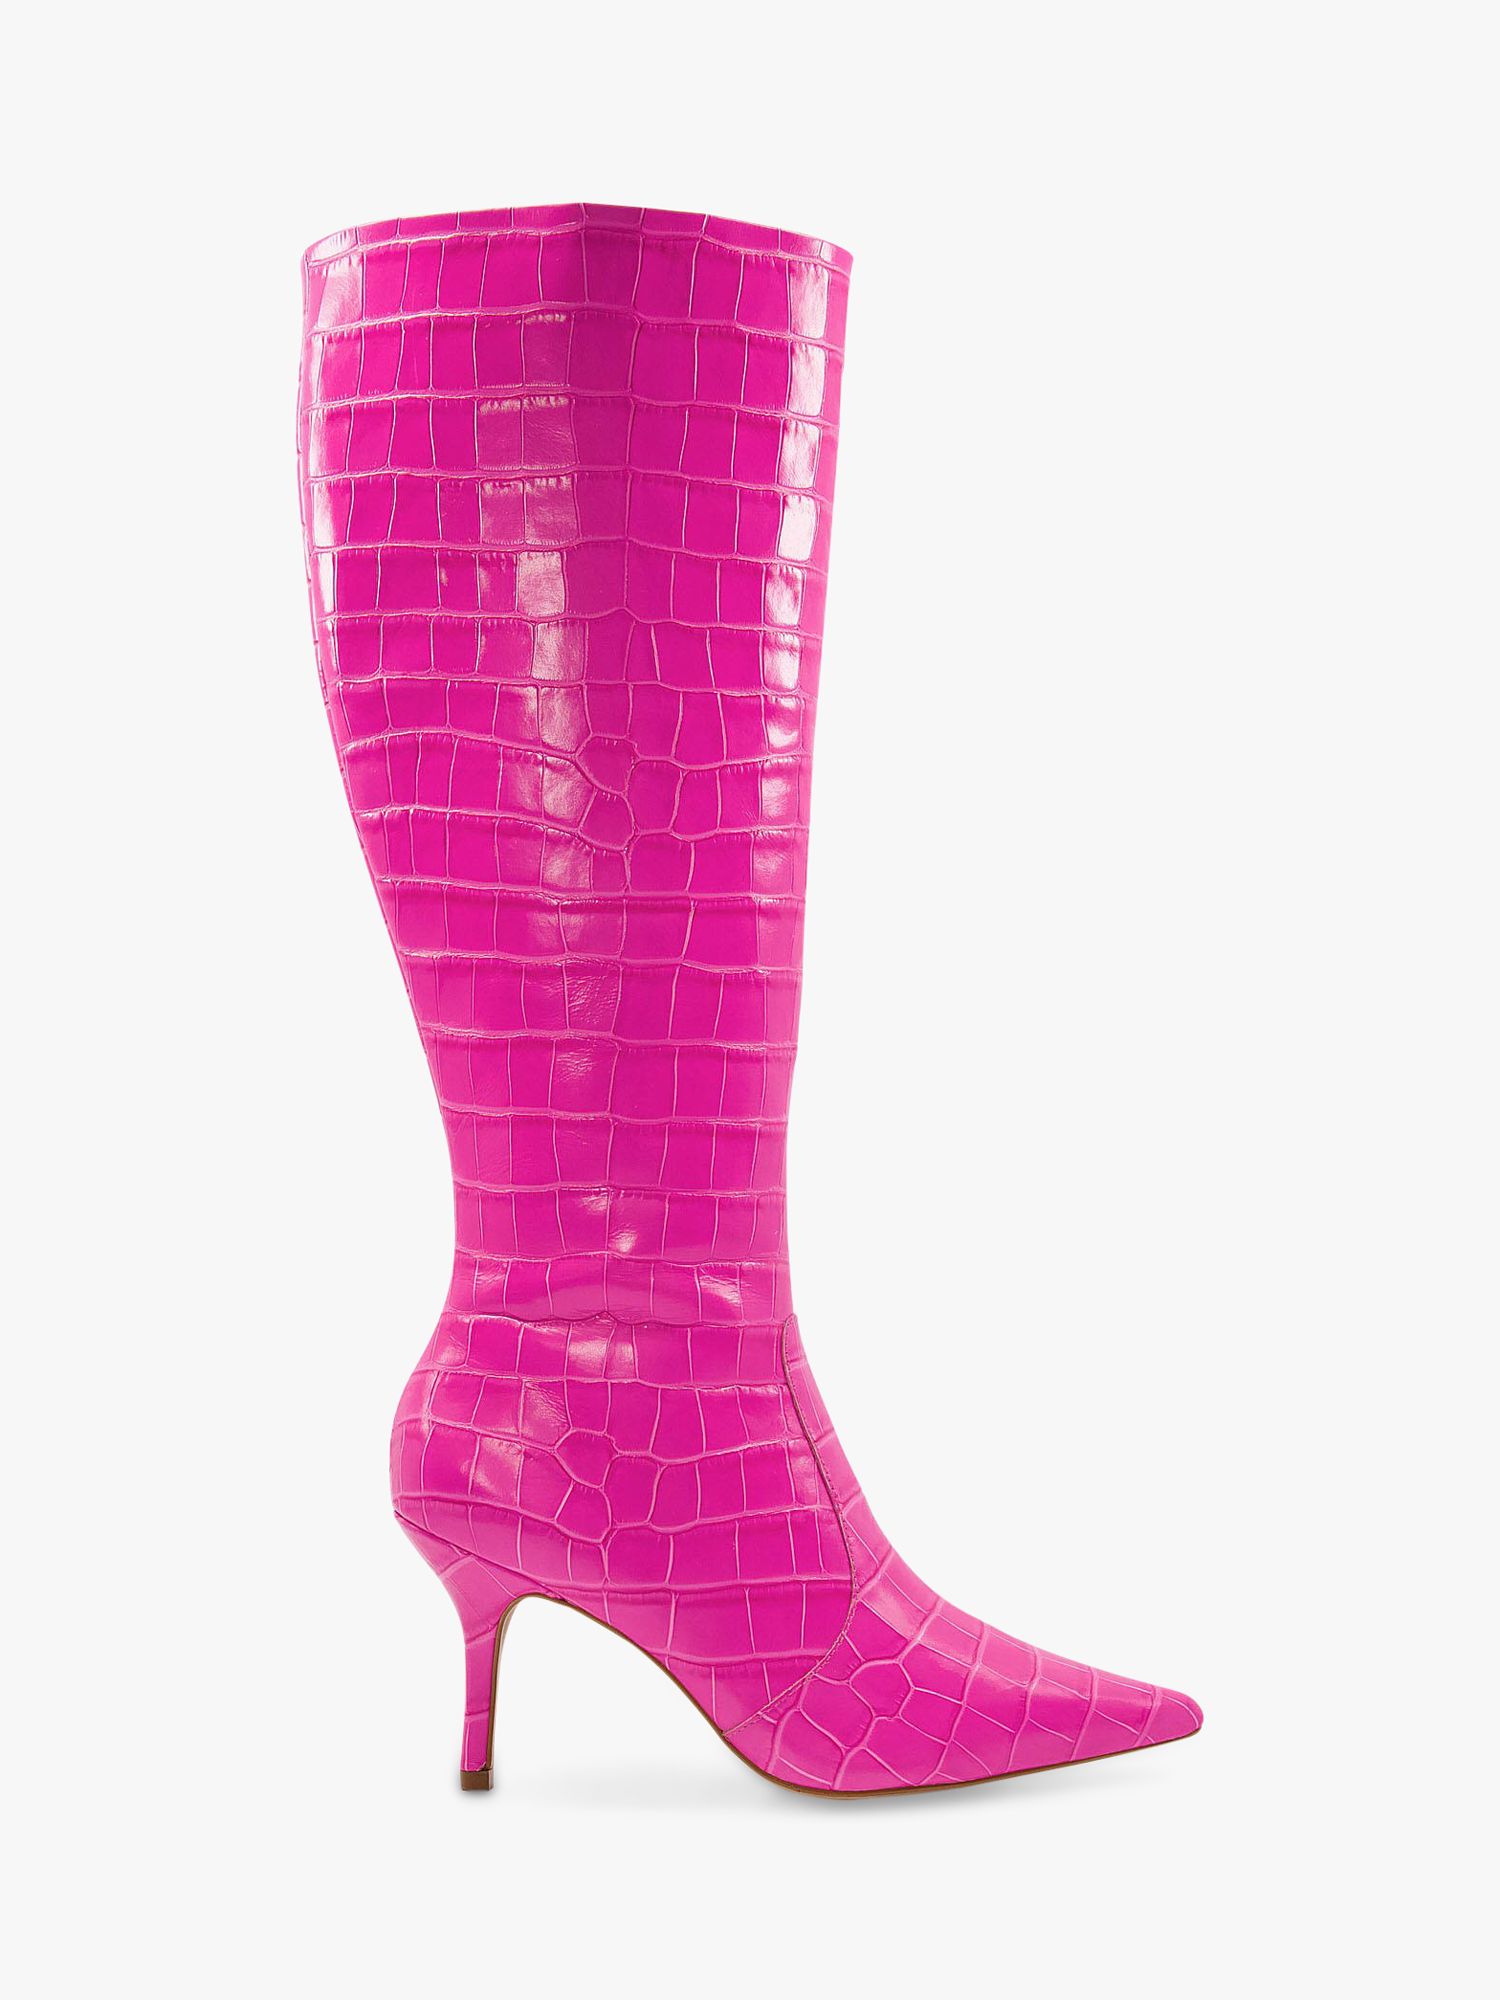 Dune Spritz Leather Croc Effect Knee High Boots, Pink at John Lewis &  Partners